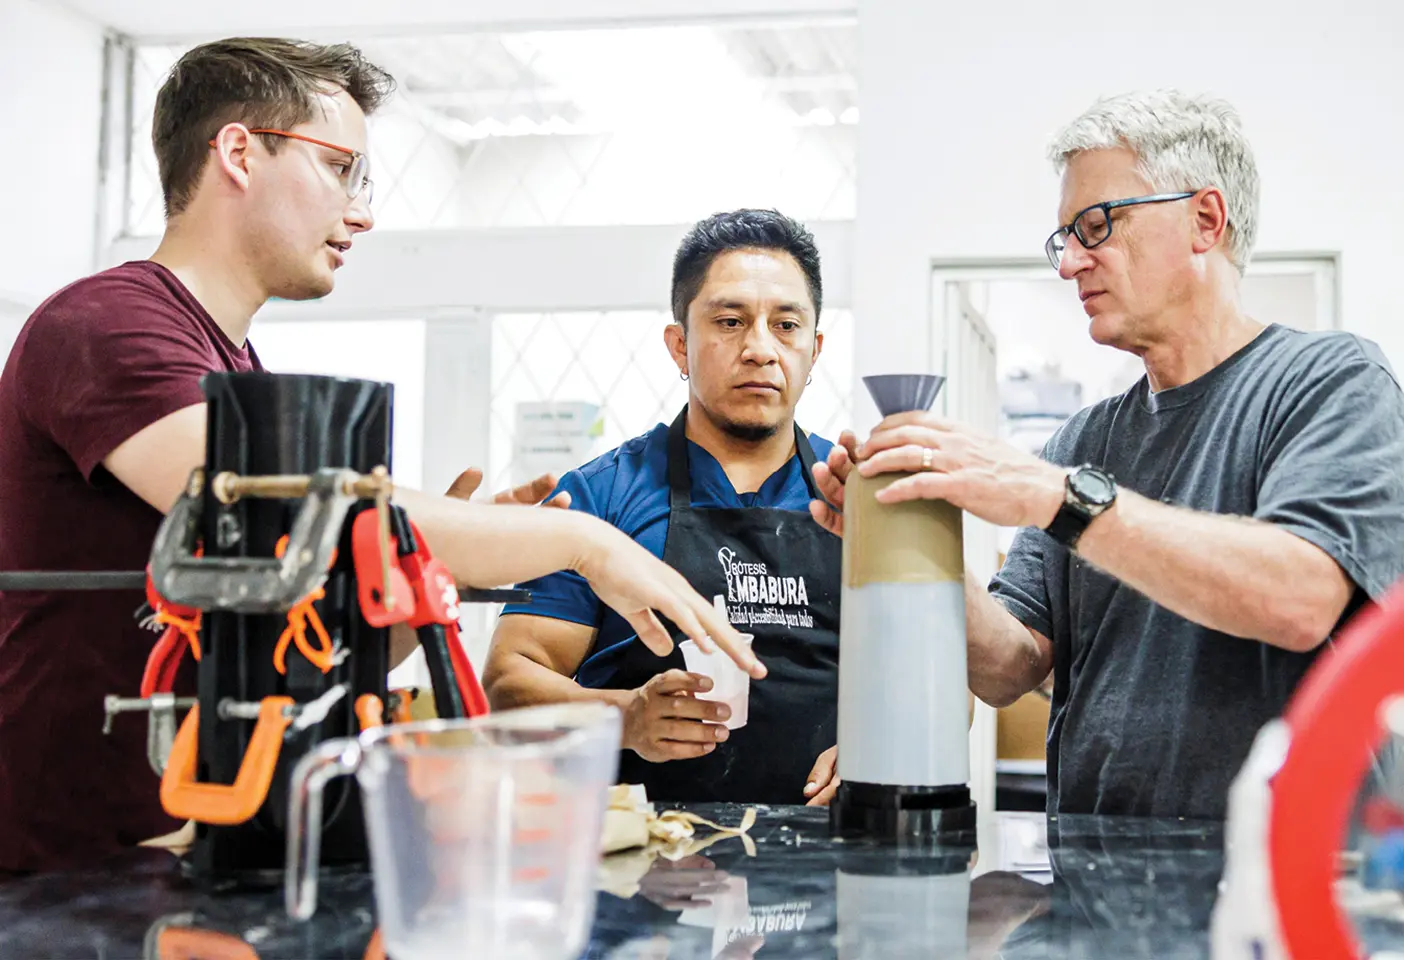 BYU mechanical-engineering
student Daniel R. Budge (’24), prosthetist Jairo Collaguazo, and professor Randy Lewis discuss the process of pouring prosthetic liners using a BYU designed 3D-printed mold.